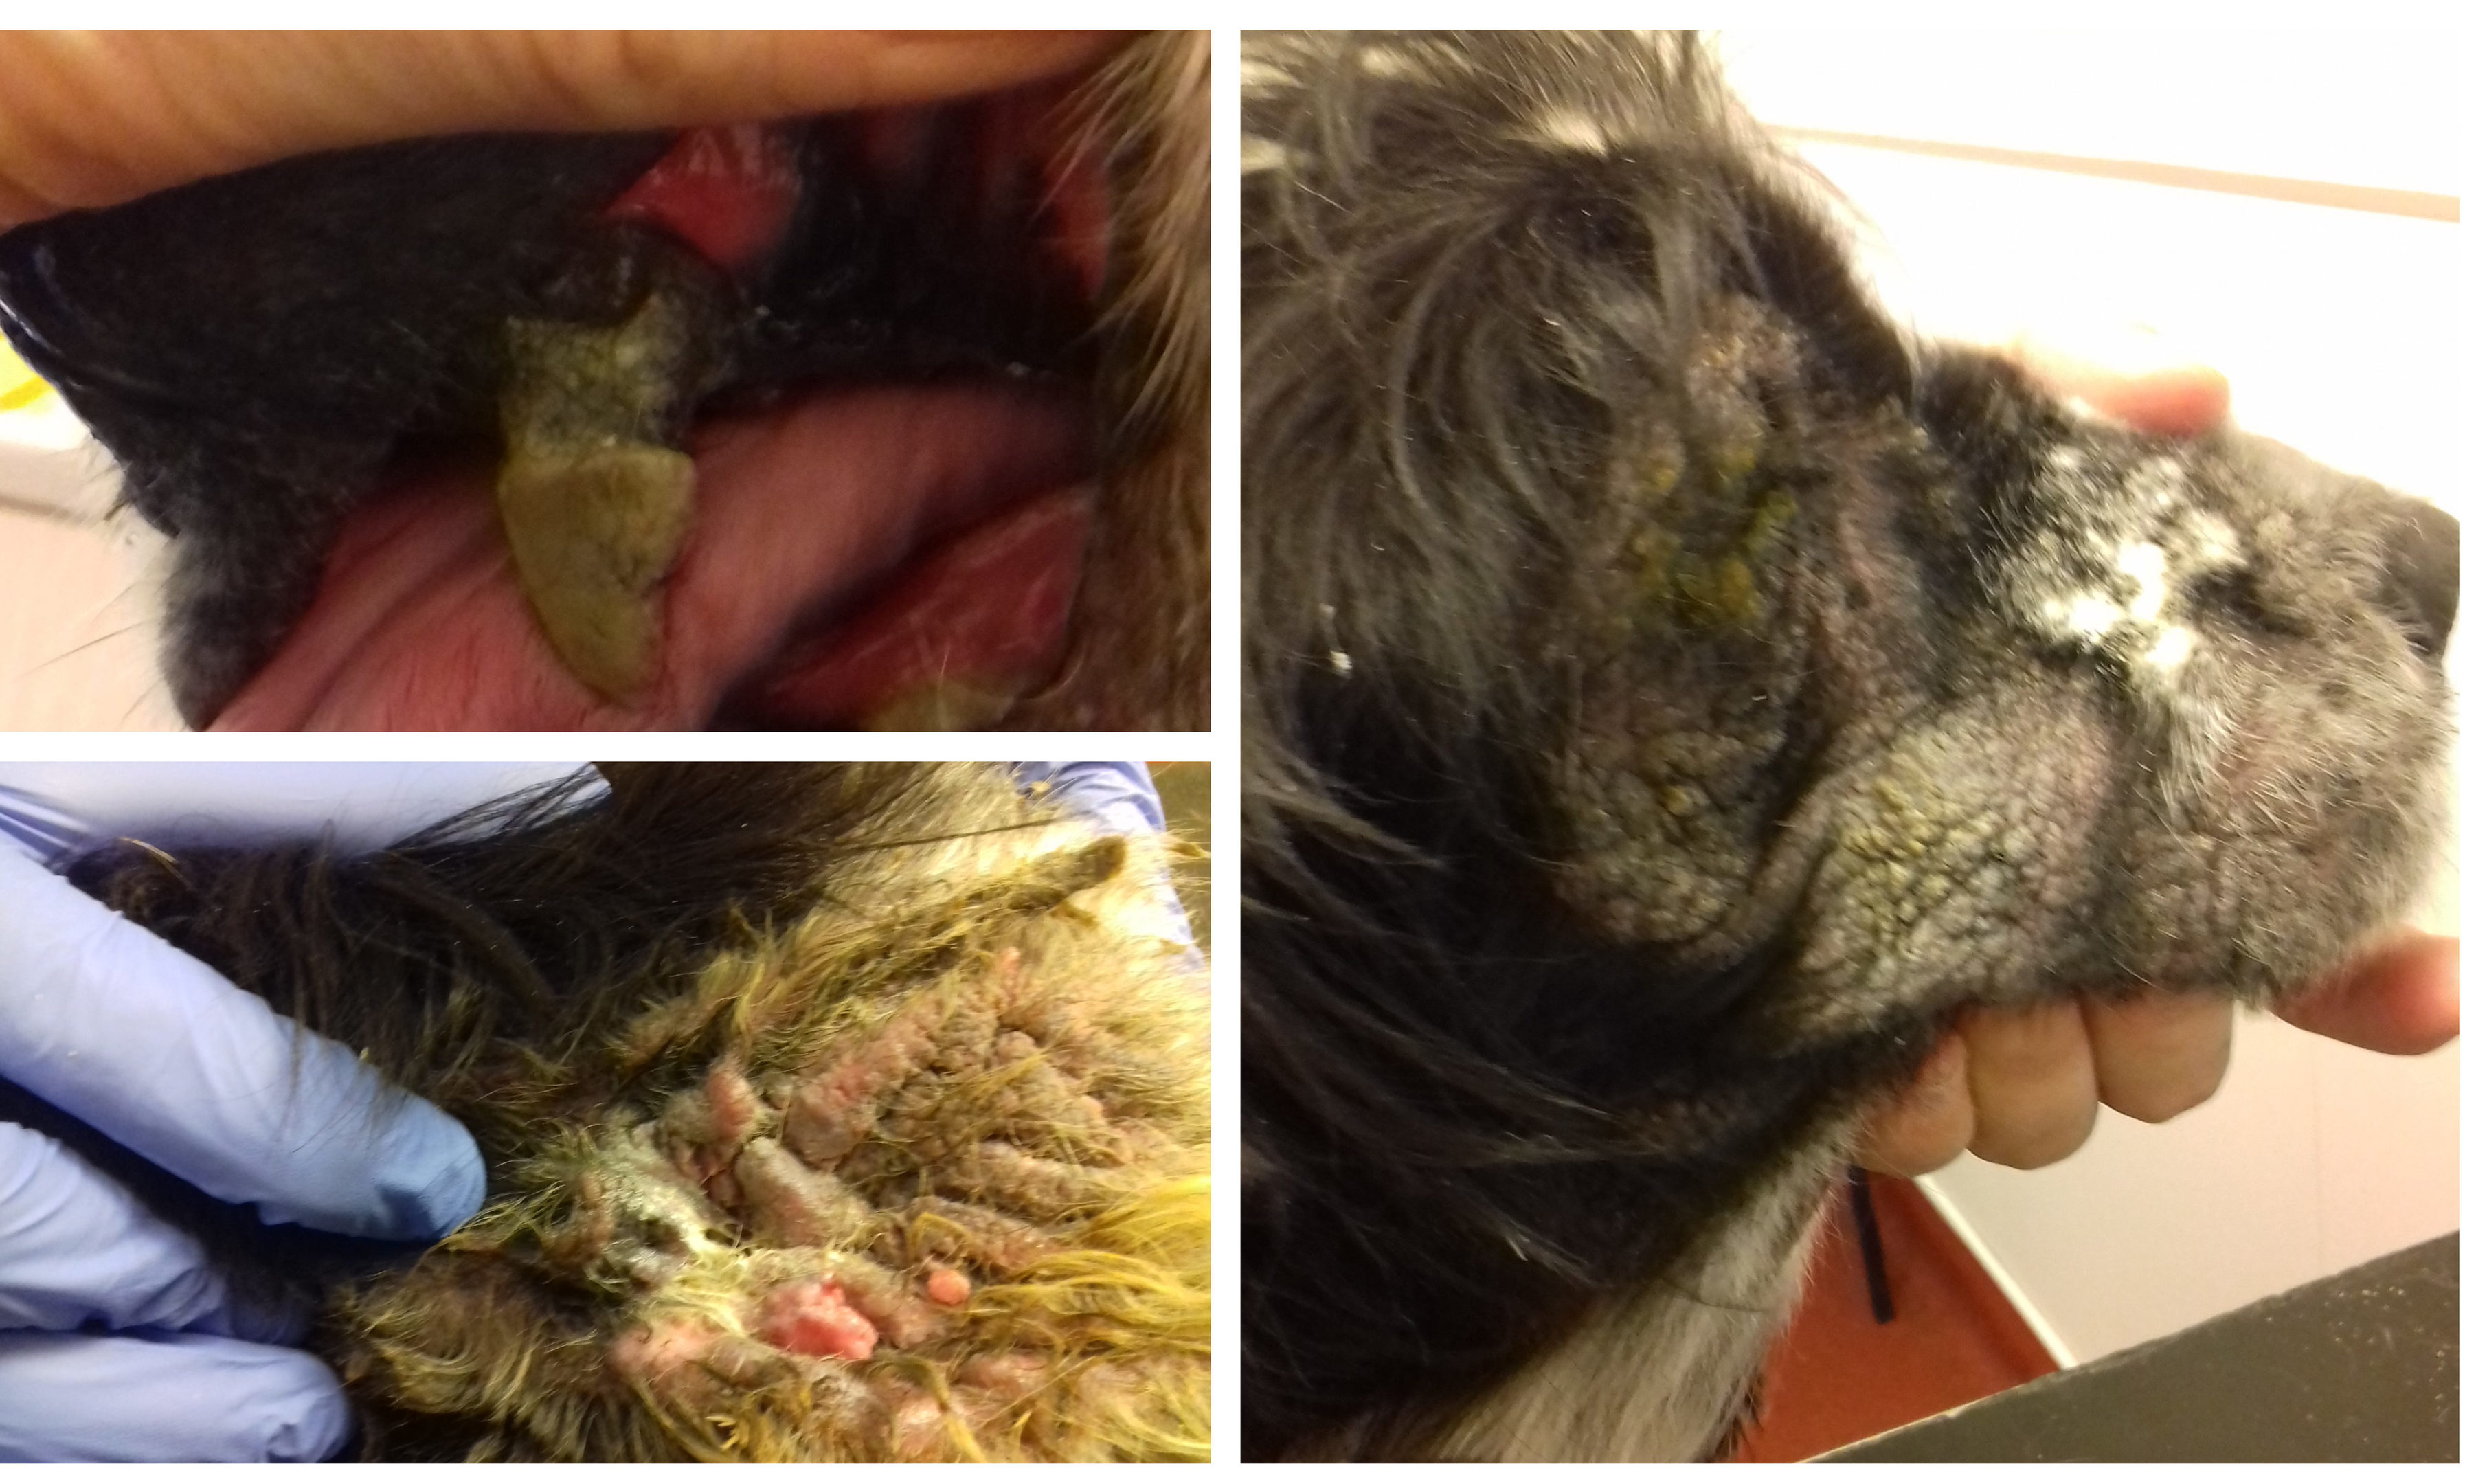 Photos showing the condition Bracken the dog was in.